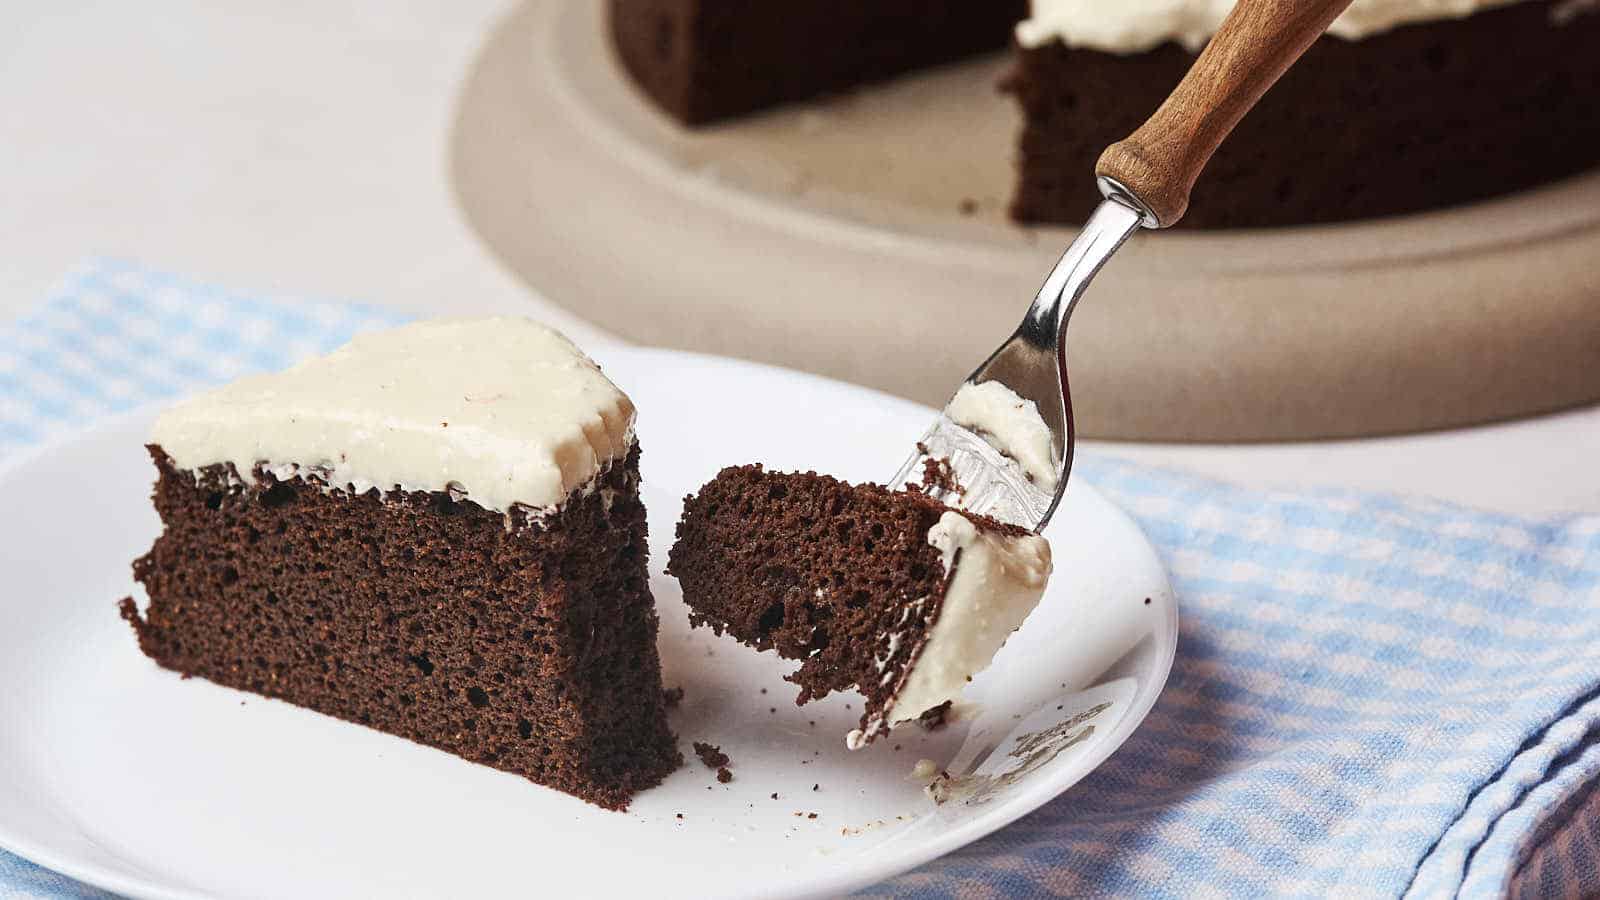 A slice of chocolate cake with white frosting being taken a bite of with a fork.